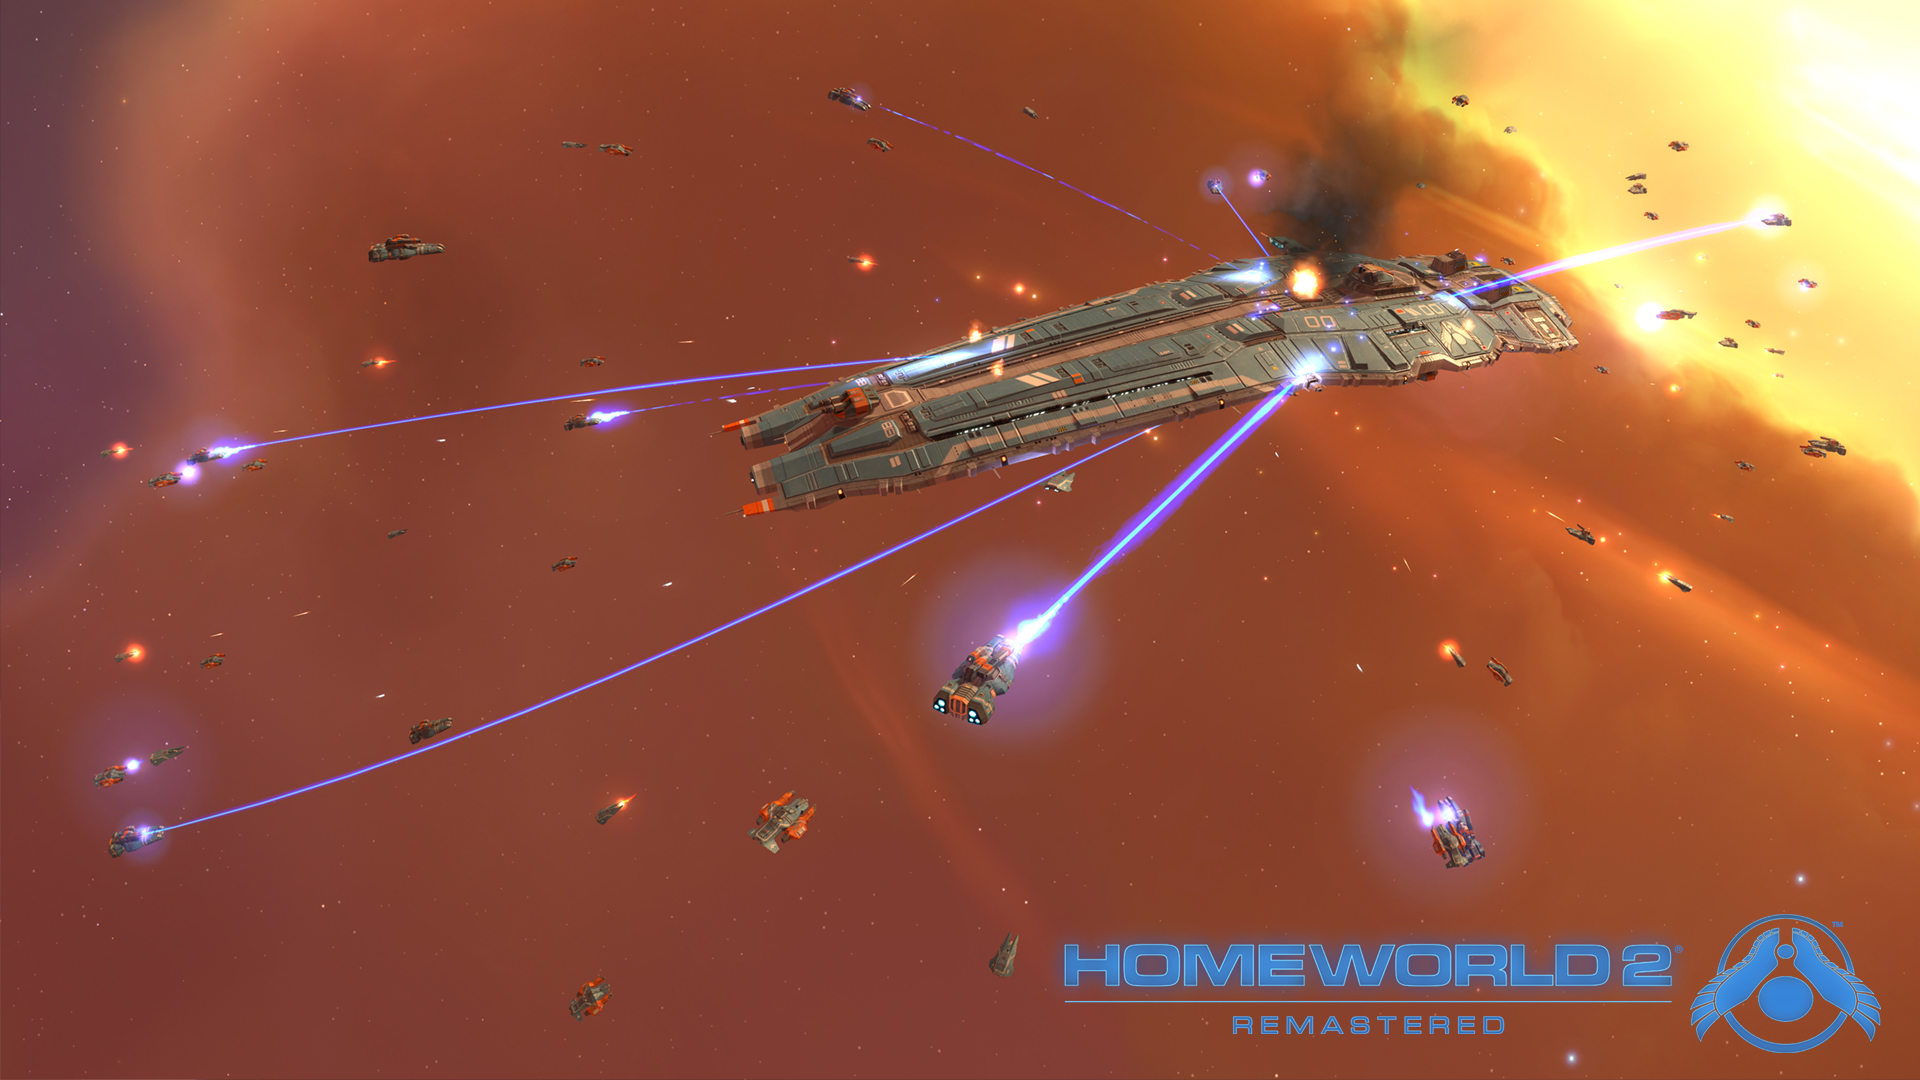 homeworld remastered collection release date